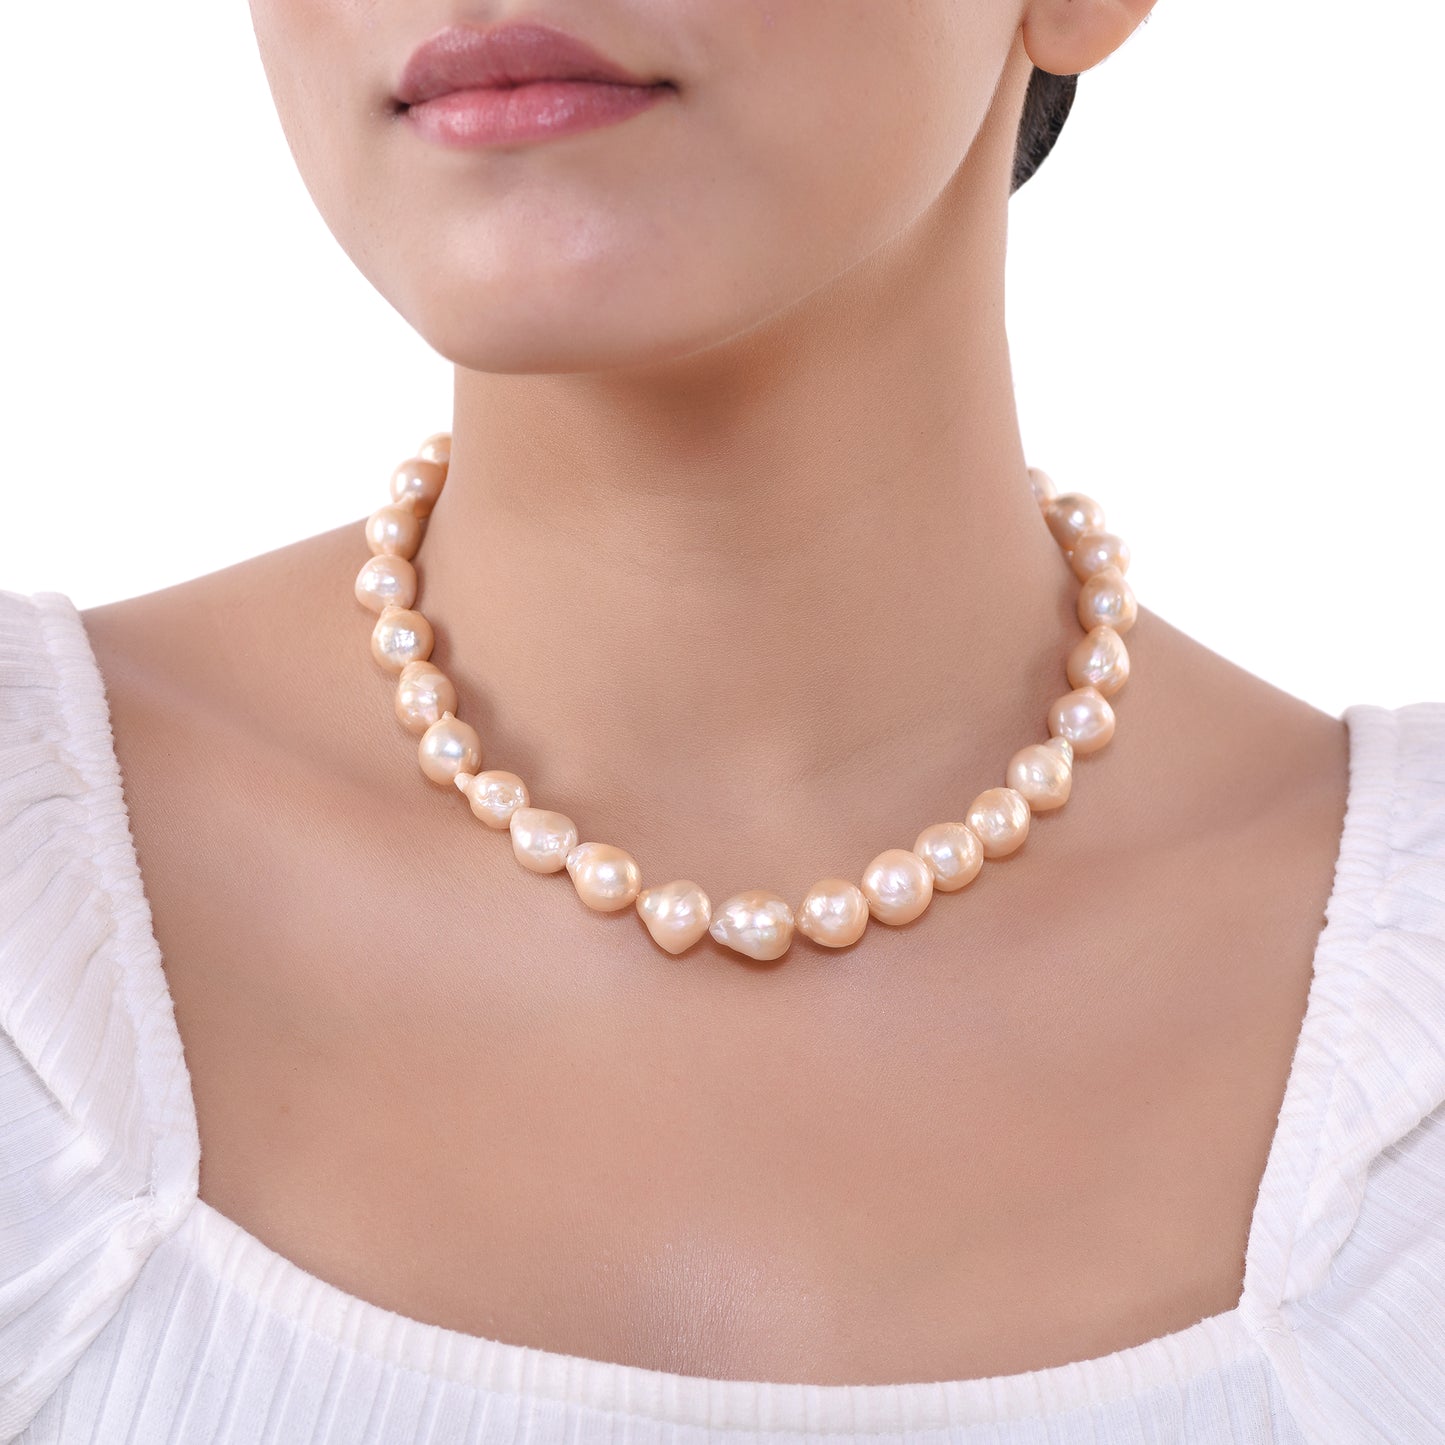 Timeless Natural Pink Baroque Pearl Necklace| 925 Silver - From Purl Purl